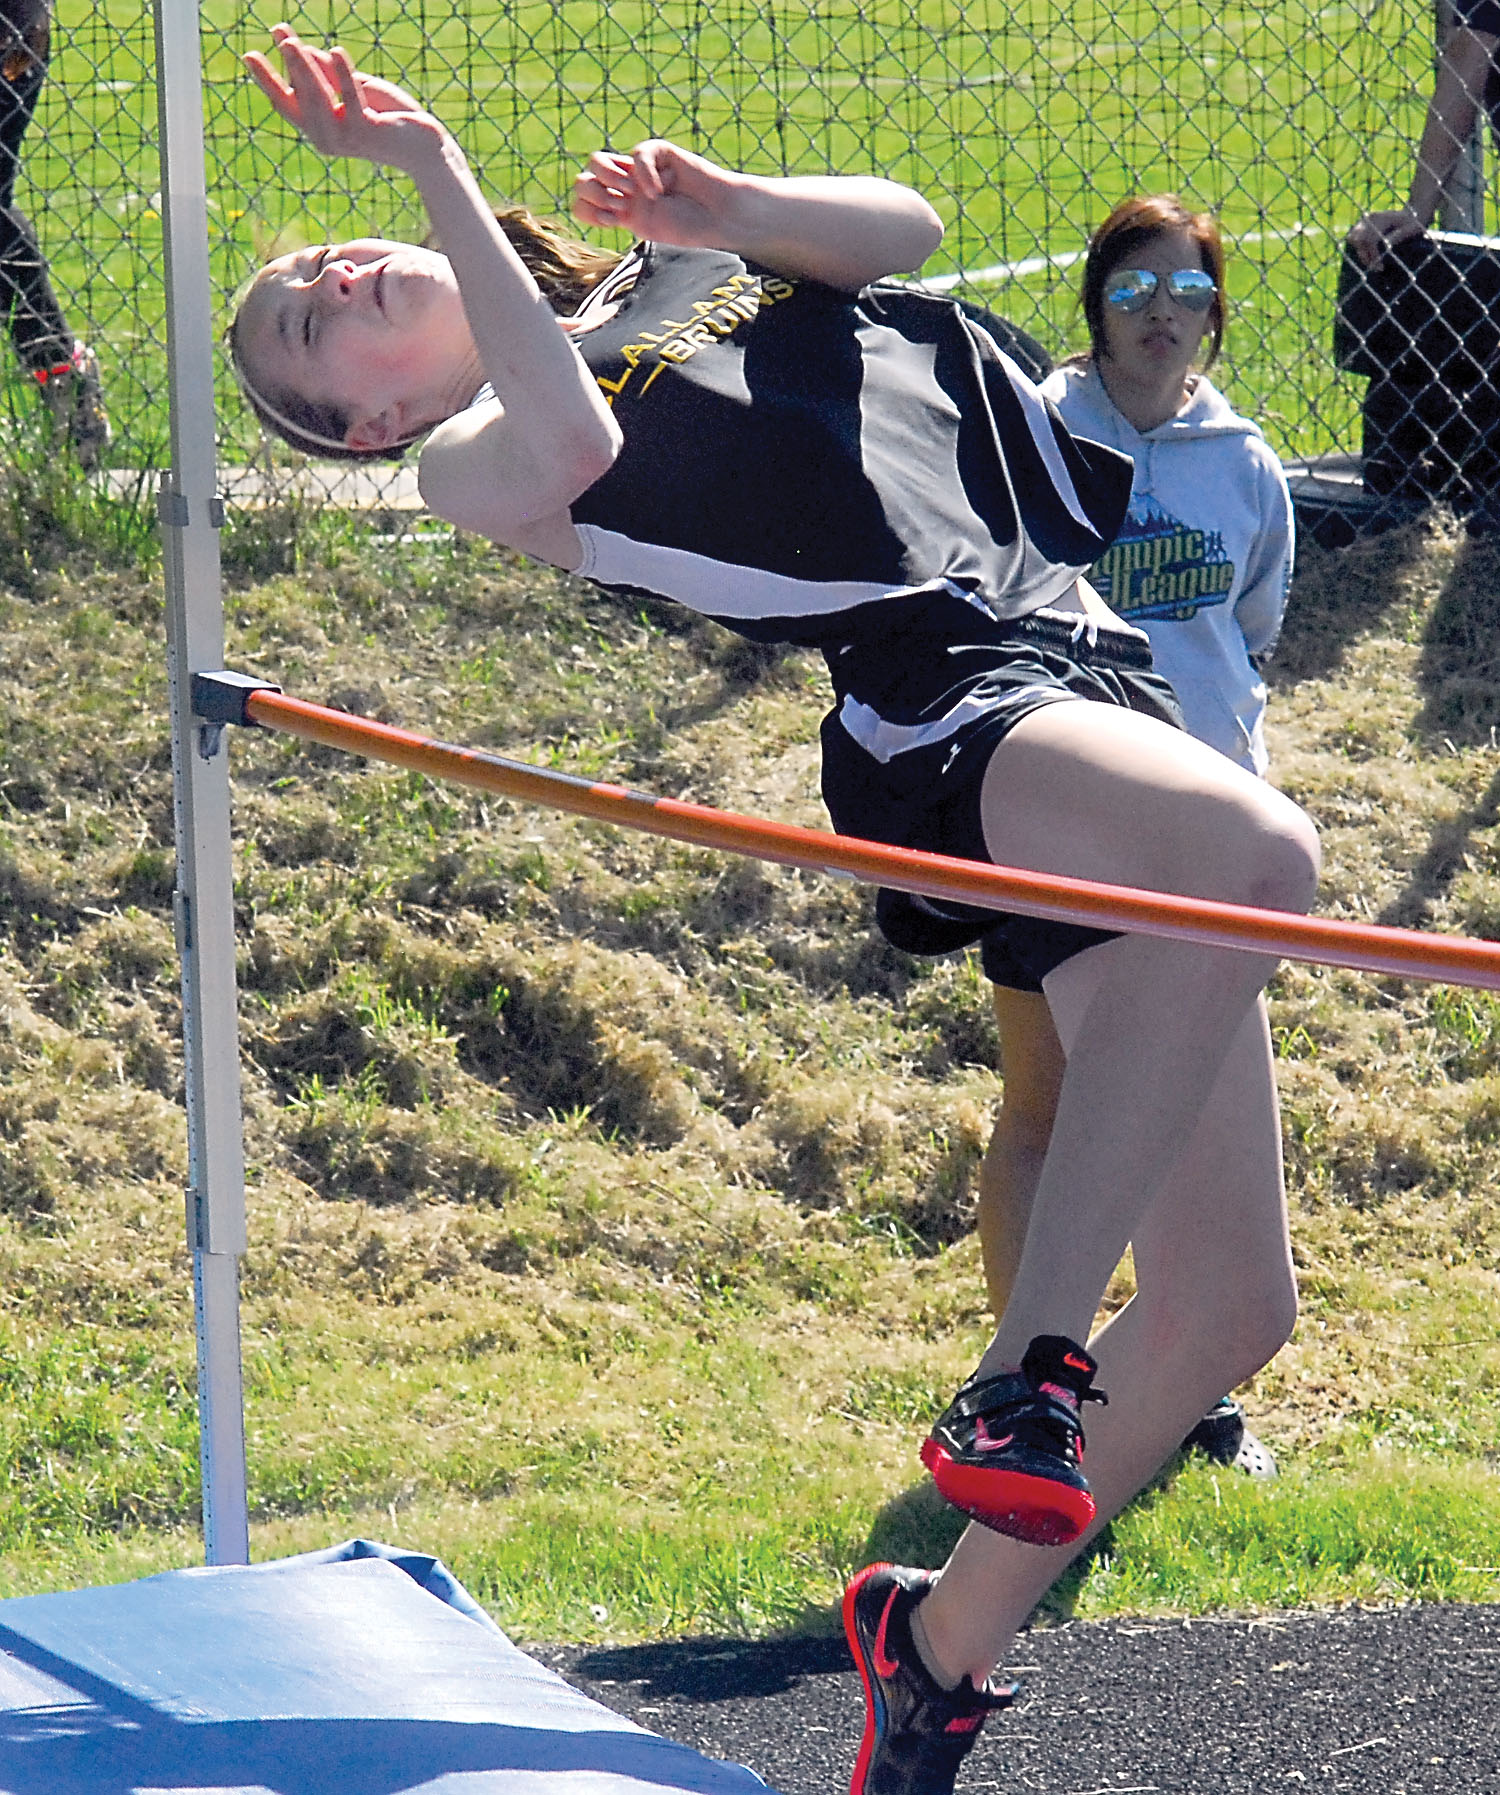 Clallam Bay's Molly McCoy clears the bar in the high jump during the North Olympic League meet at Crescent High School. Keith Thorpe/Peninsula Daily News